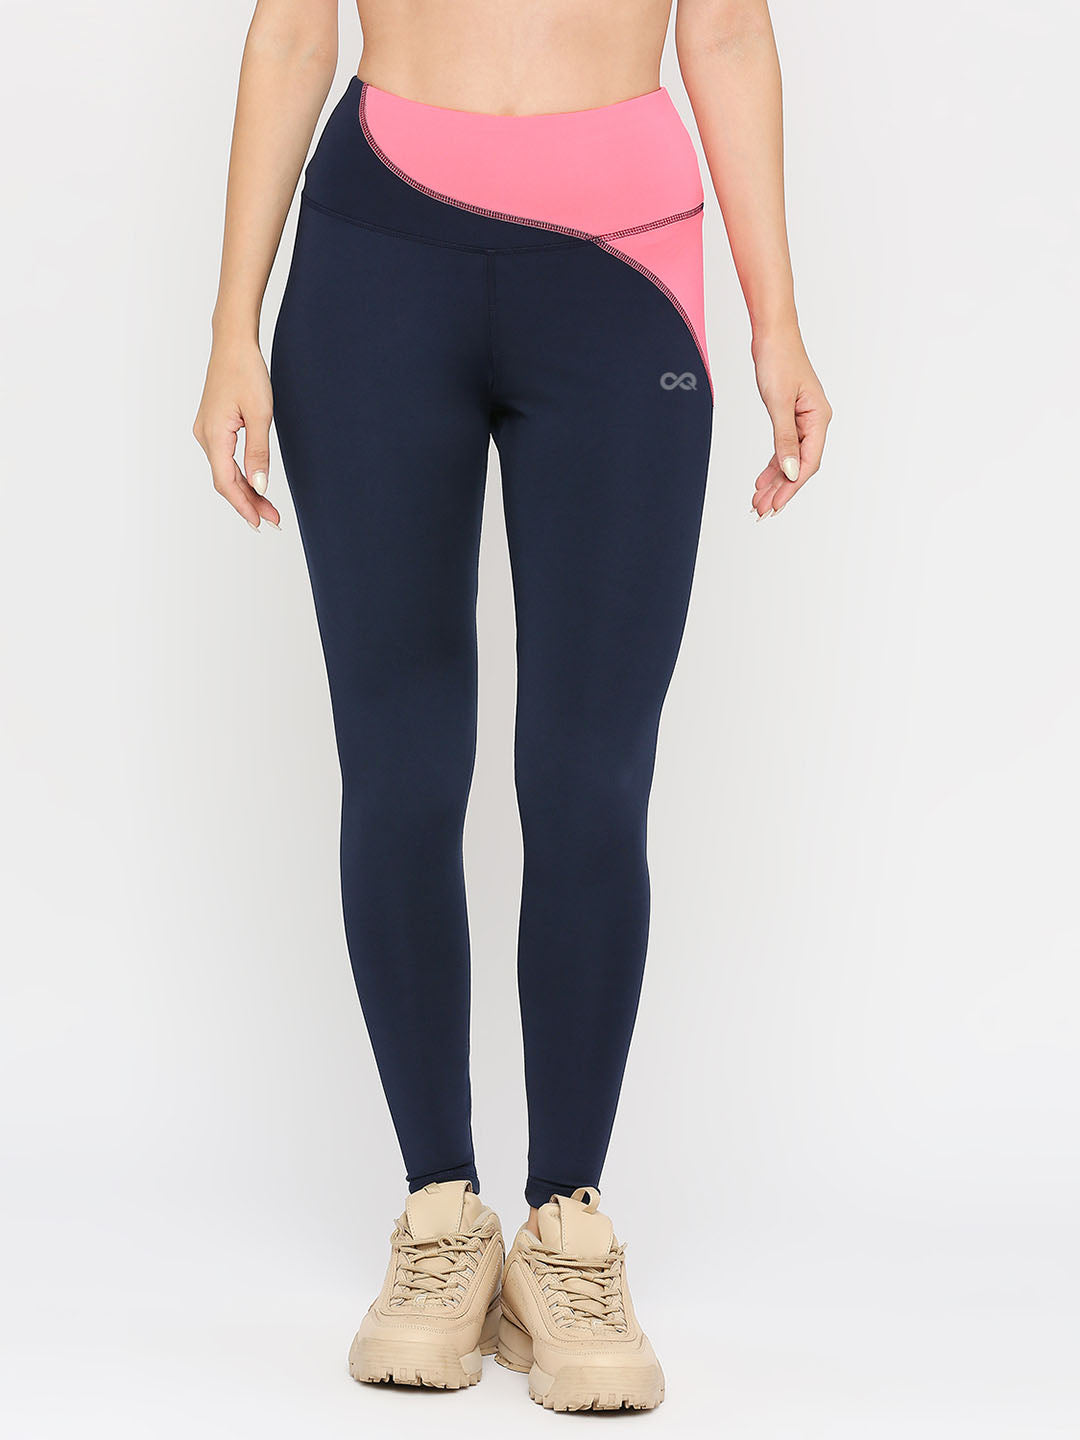 Buy Activewear Ankle Length Tights in Royal Blue Online India, Best Prices,  COD - Clovia - AB0042P08